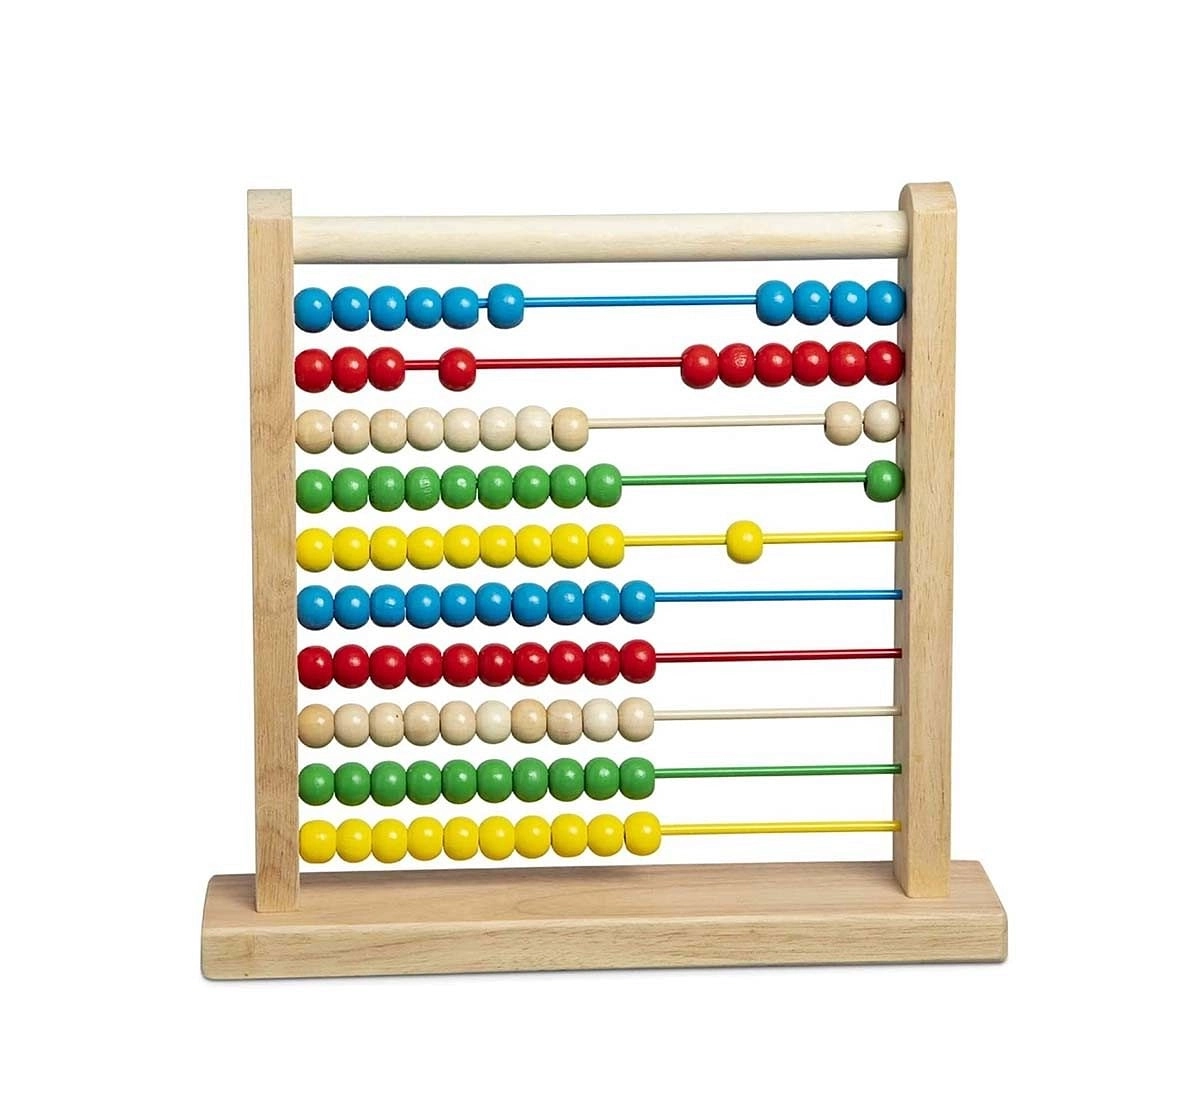 Melissa And Doug Abacus Wooden Toys for Kids Age 3Y+